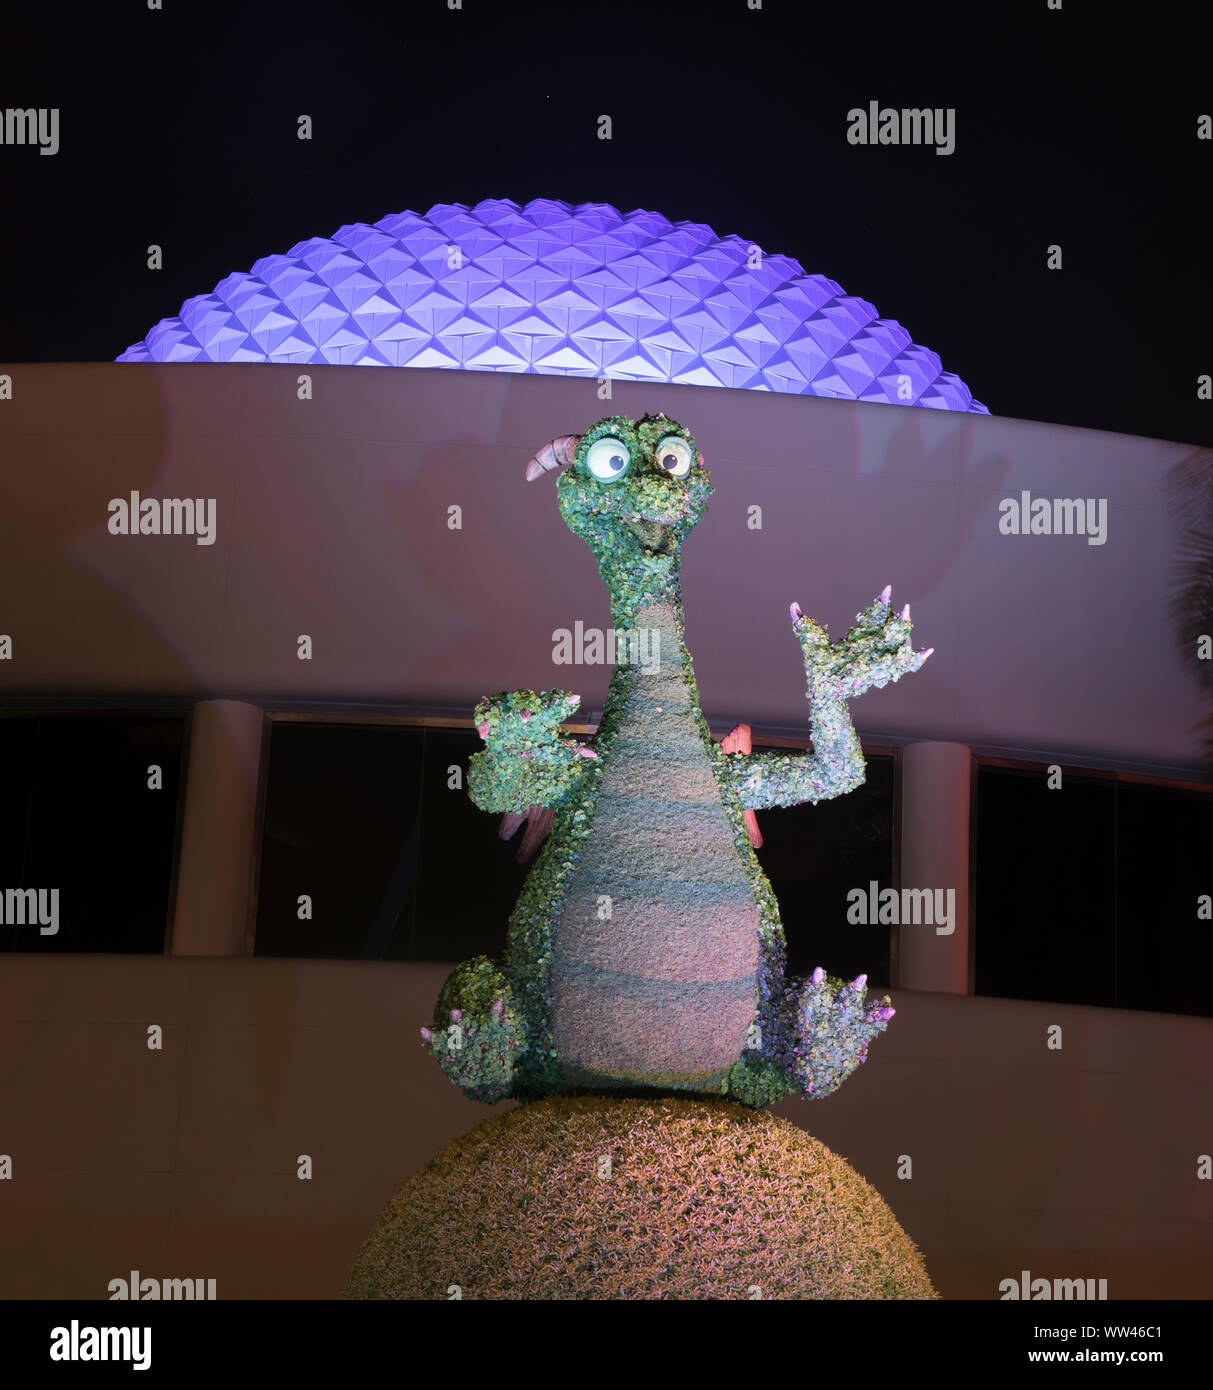 Epcot Center smiling and lighted Imagination Dragon at night, with the Epcot Spaceship Earth sphere in background. lit in purple. Stock Photo